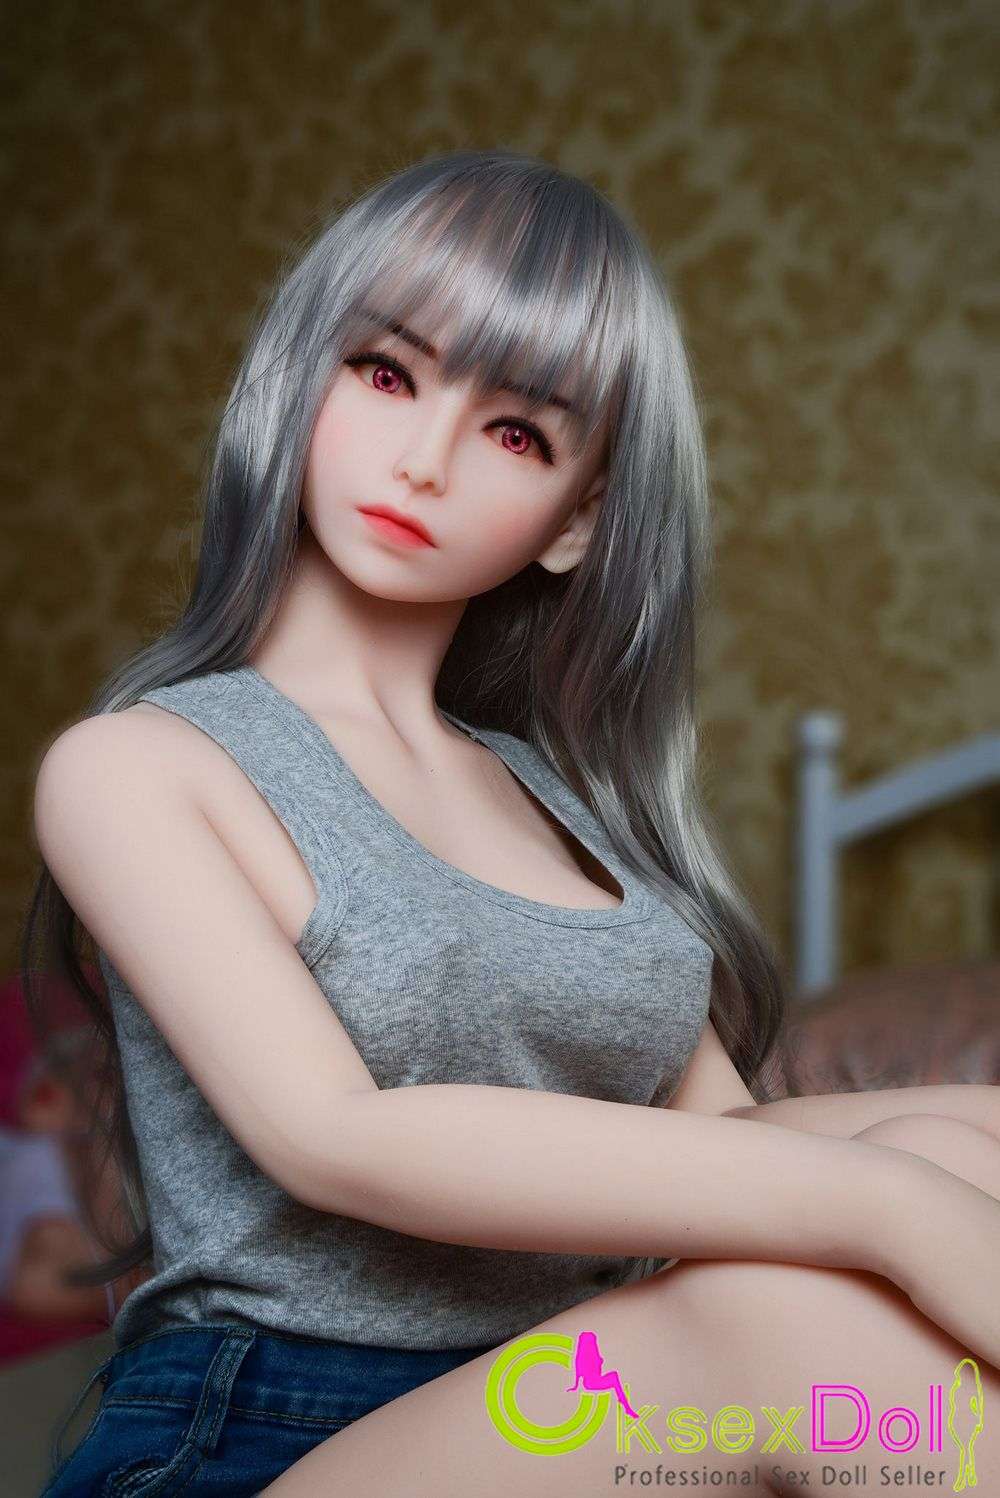 White real sex doll images